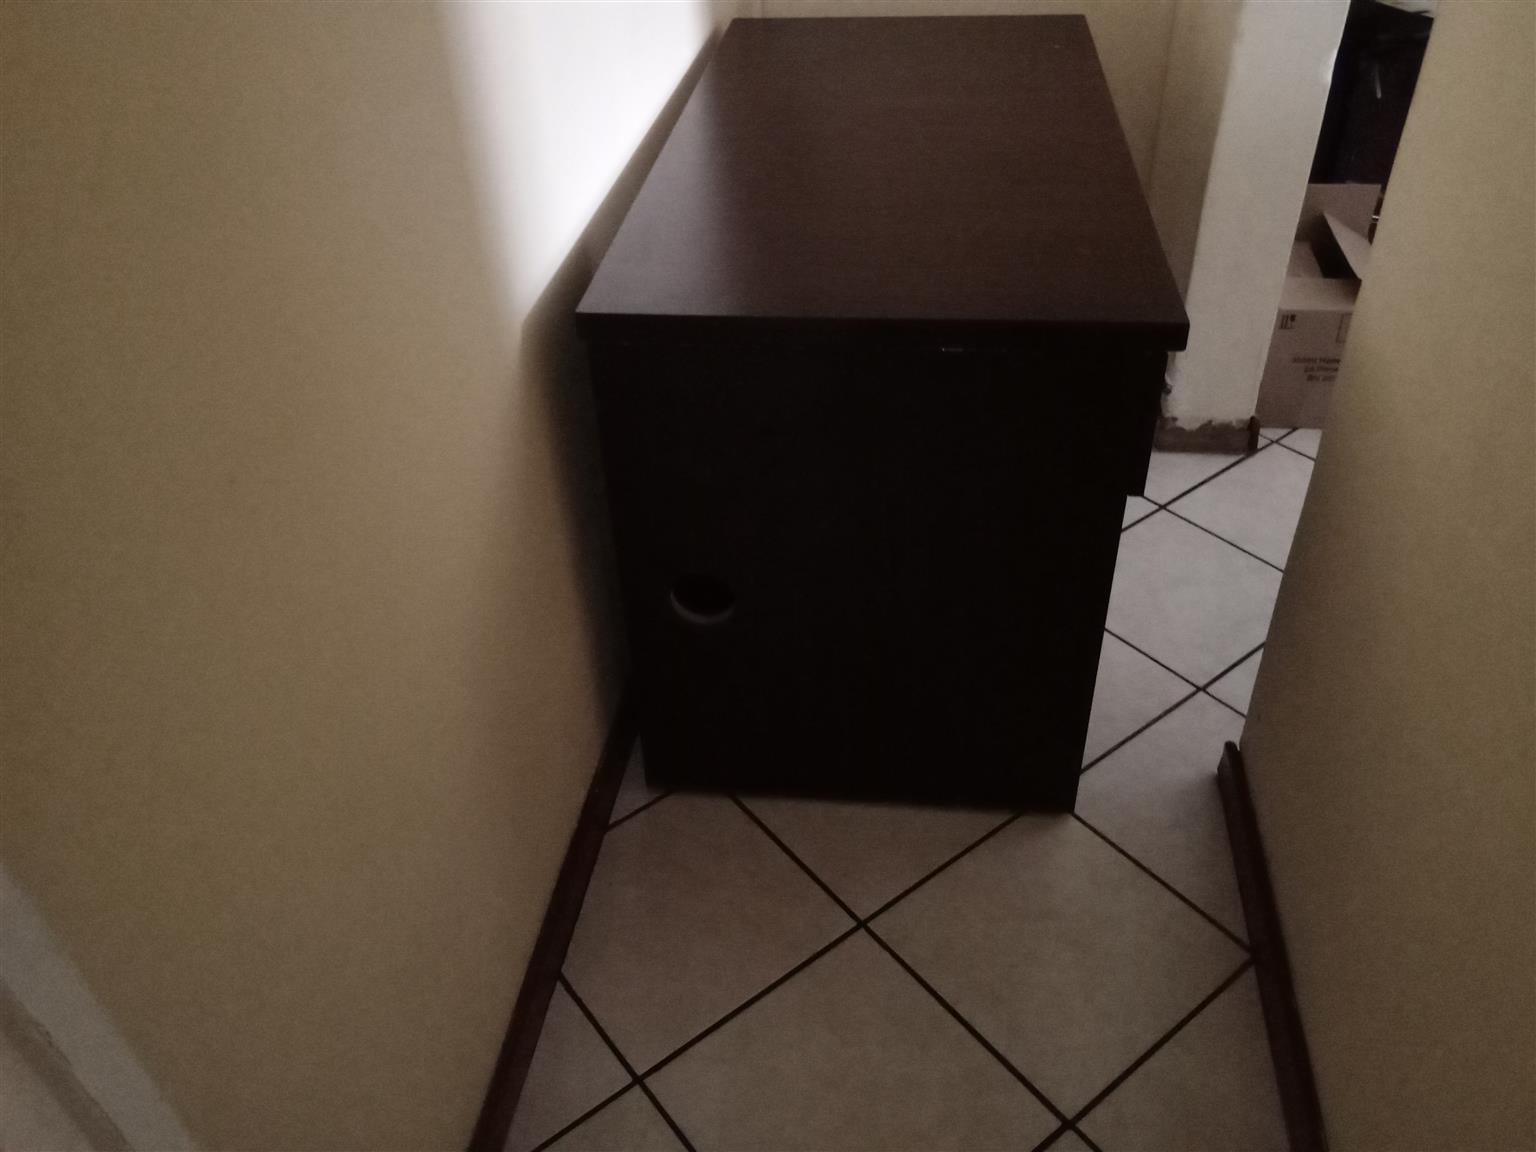 Home Office Desk in good condition 